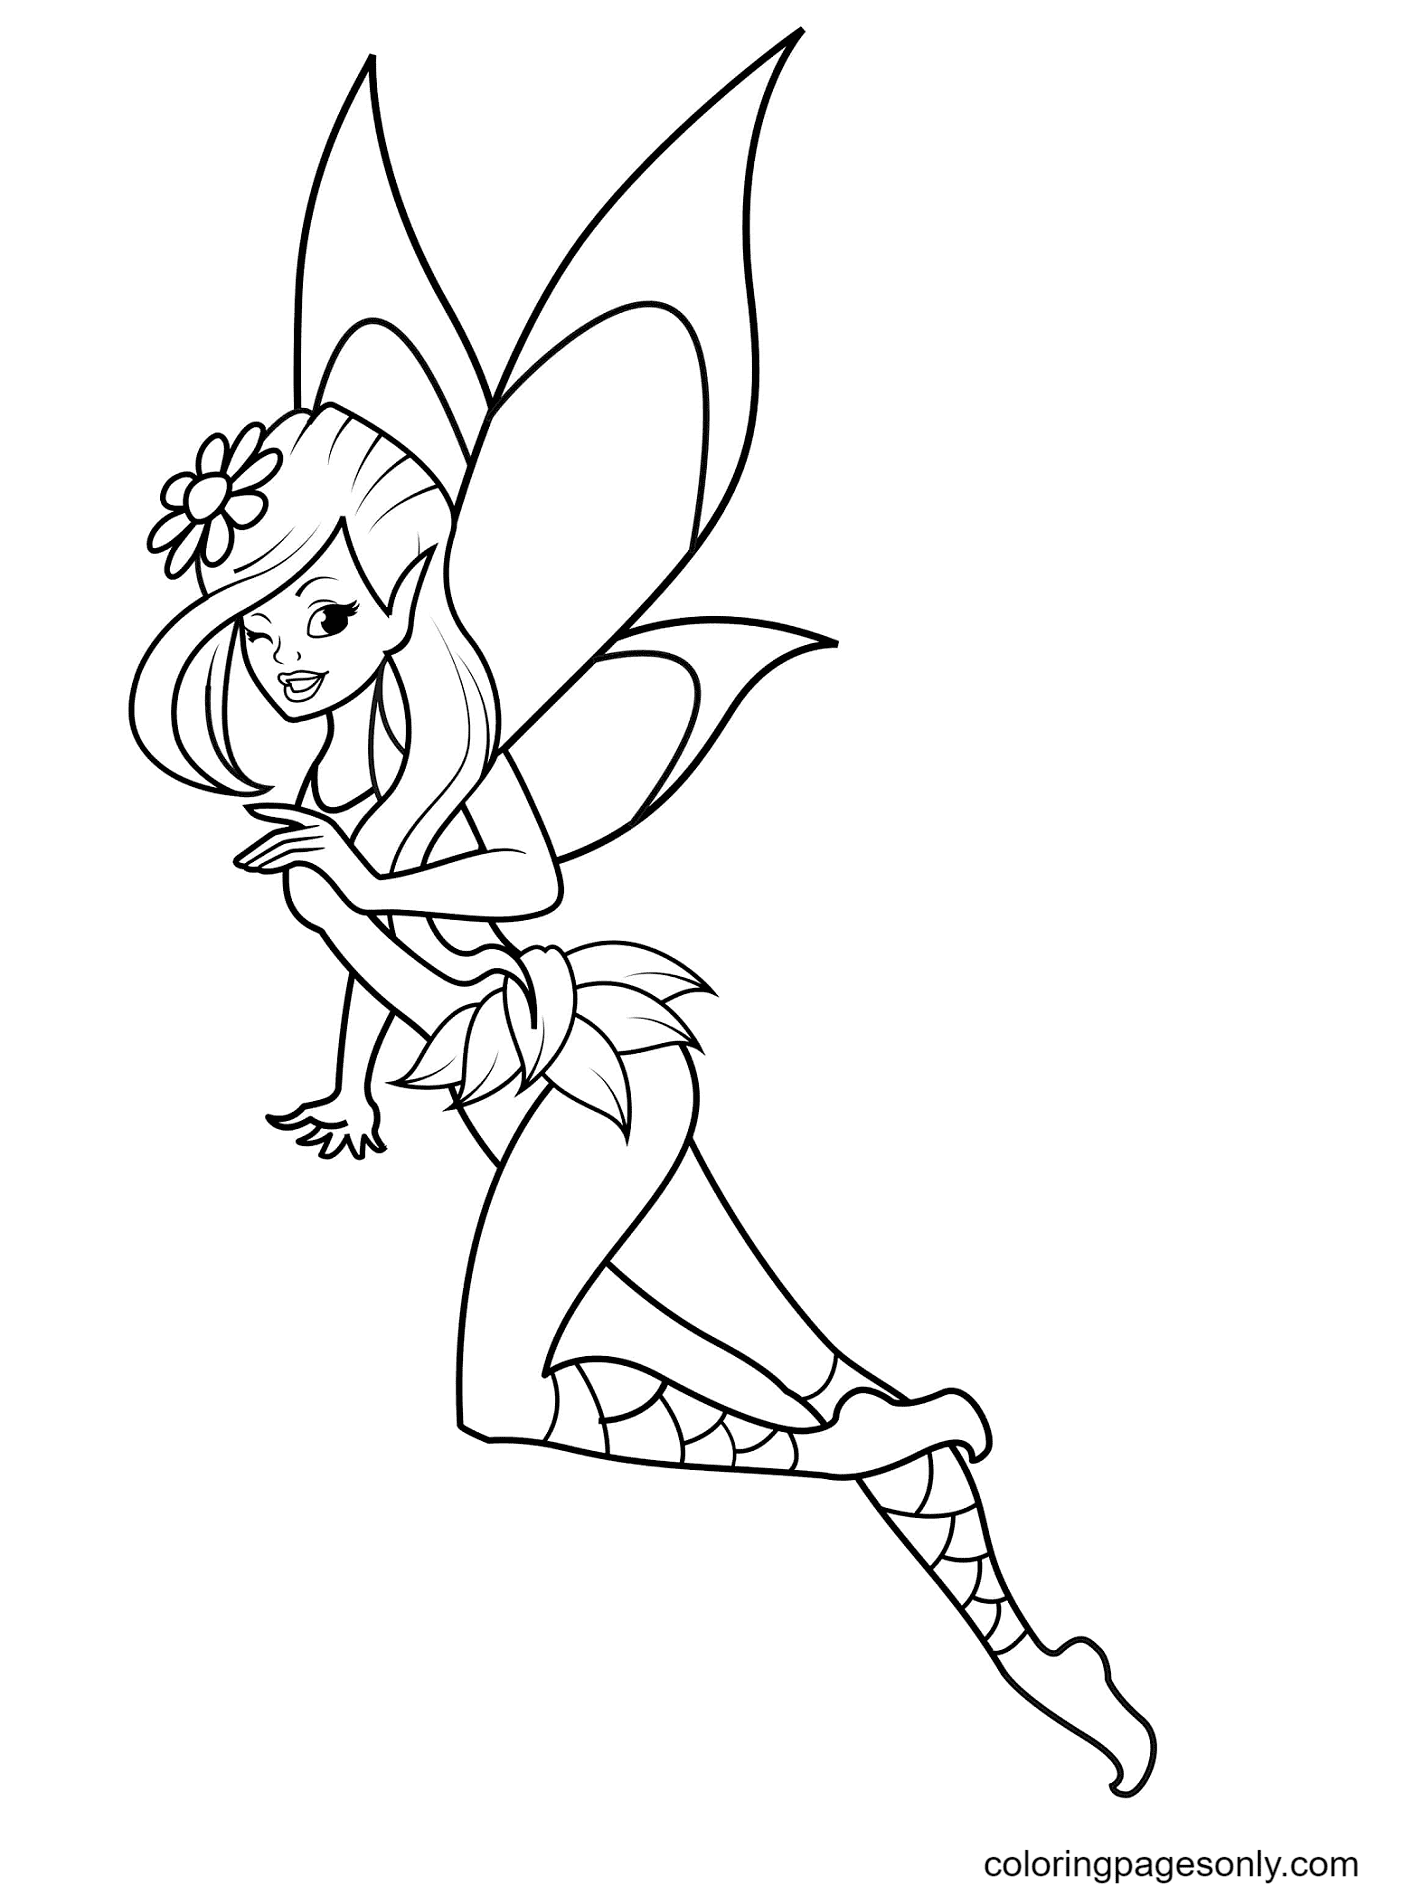 Tinkerbell Flying from Fairy